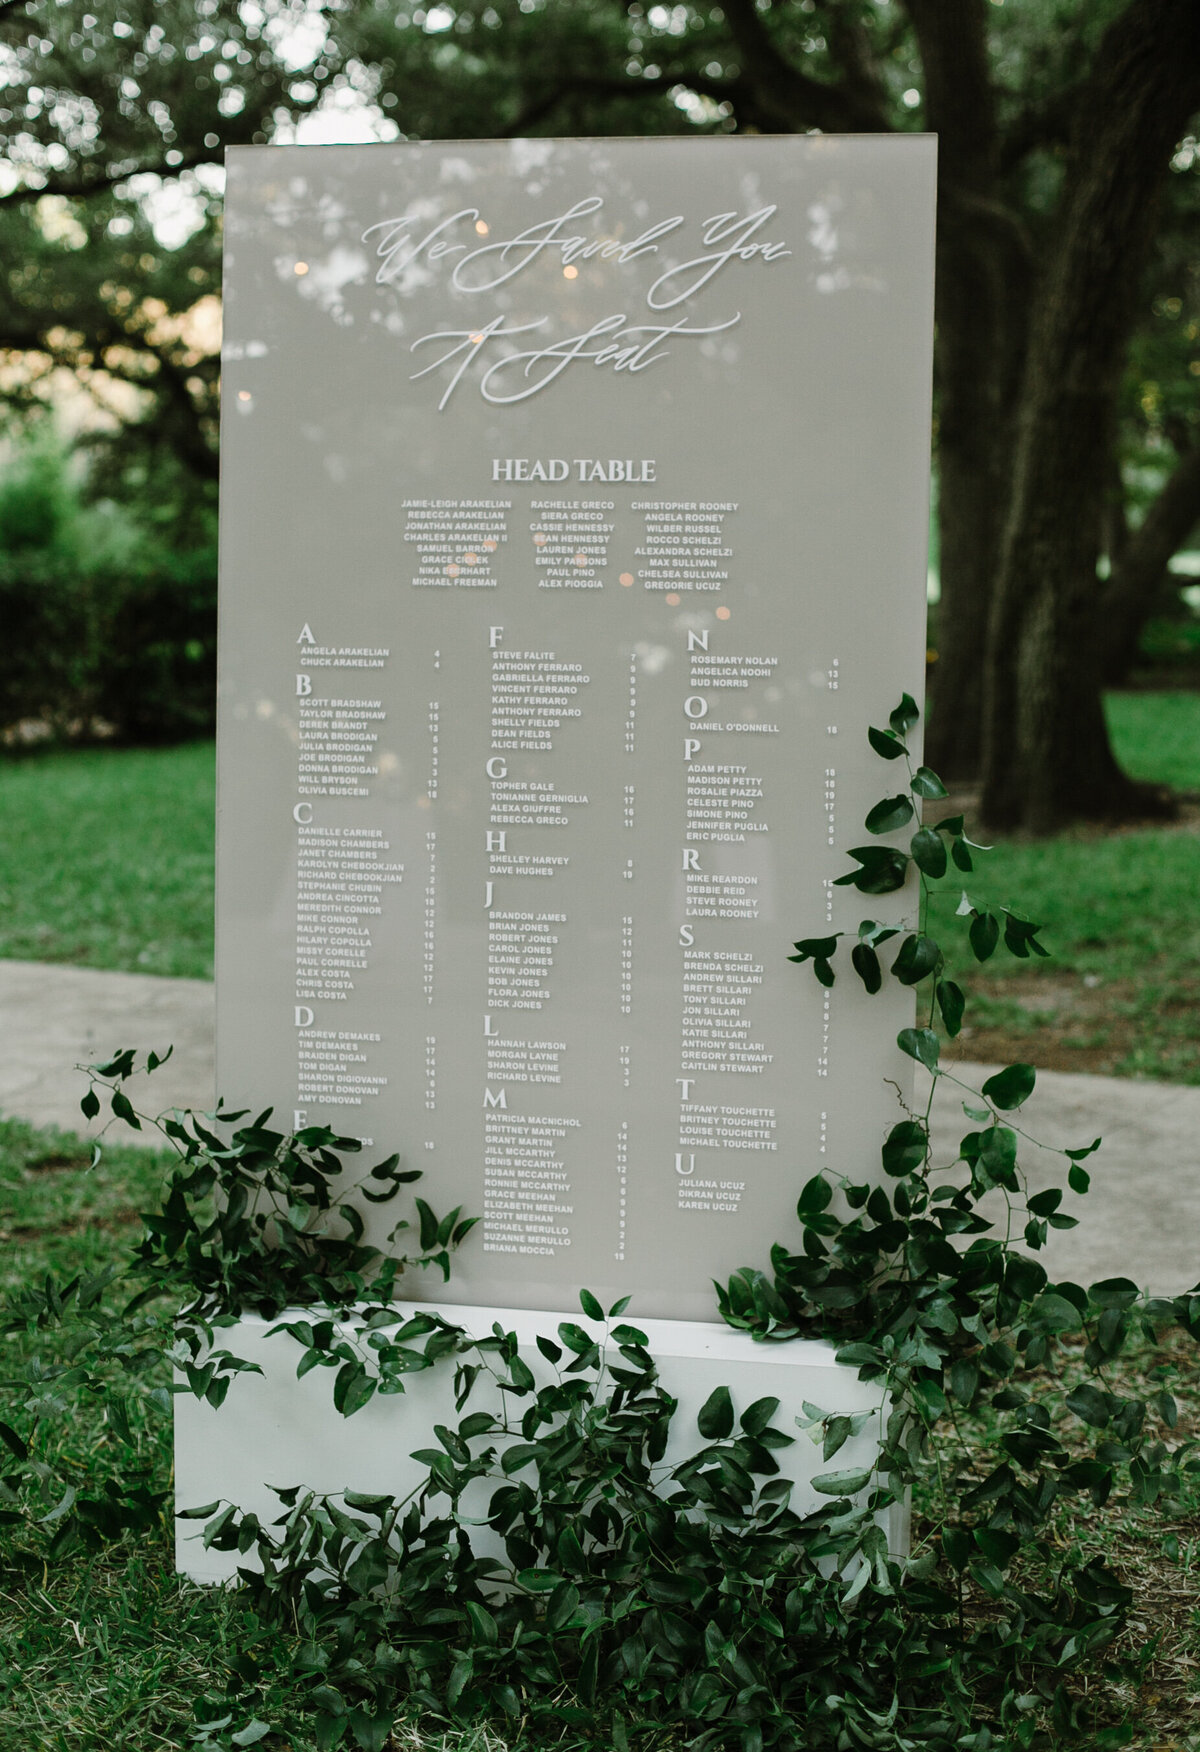 LBV Design House Wedding Design Planning Day-Of Signage Paper Goods Shoppable Accessories Wedding Day Austin, Texas beyond Valerie Strenk Lettered by Valerie Hand Lettering1